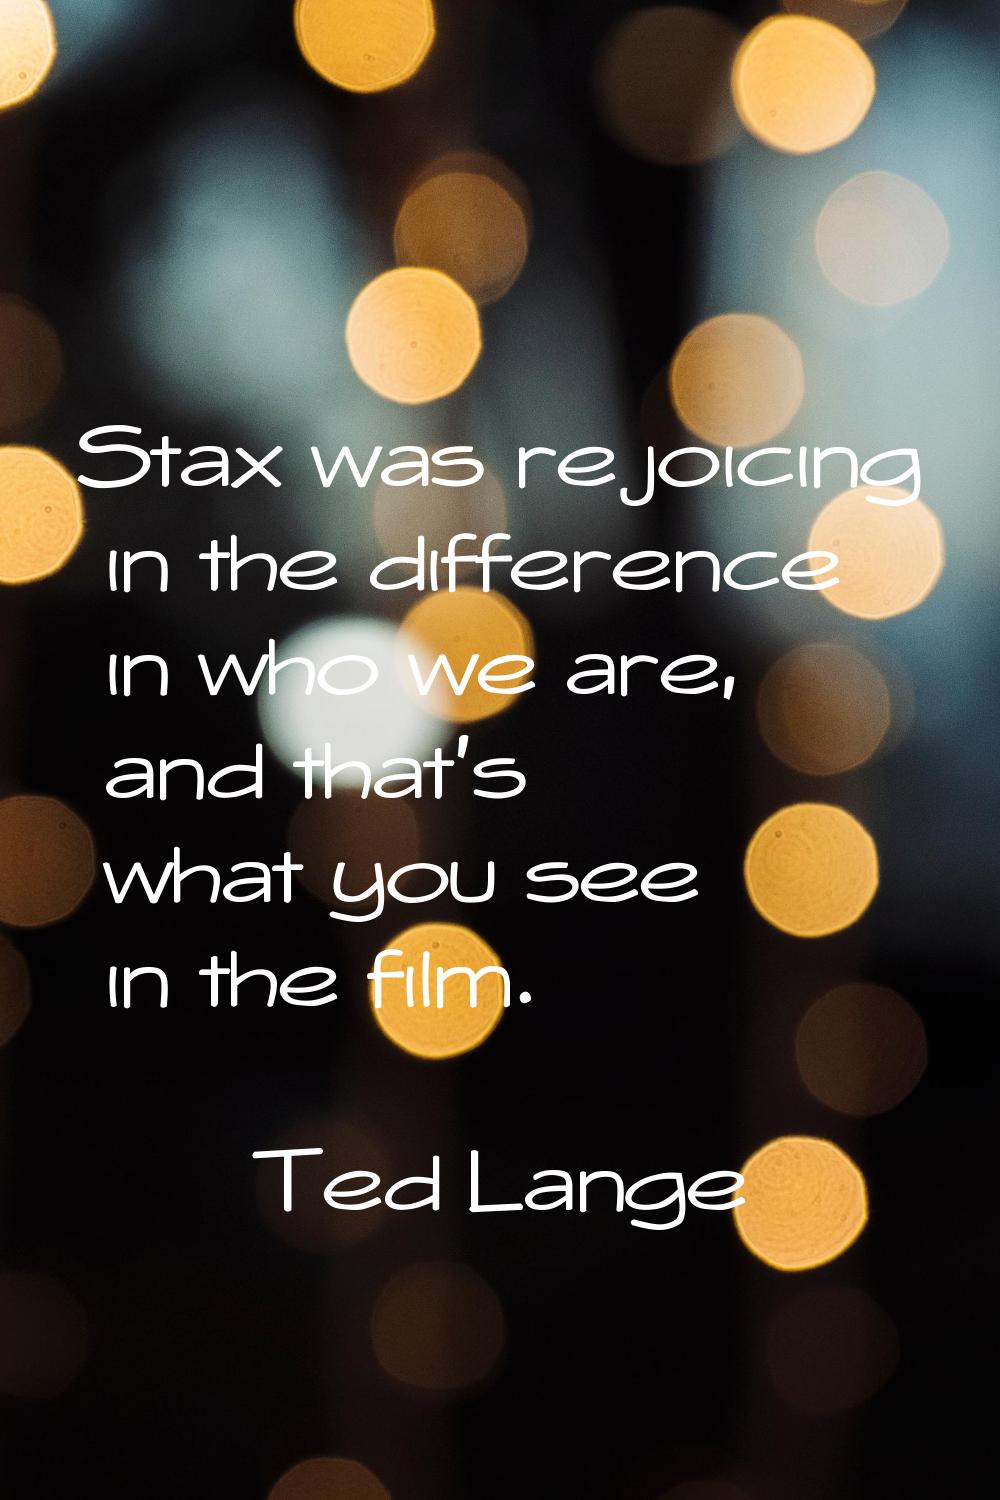 Stax was rejoicing in the difference in who we are, and that's what you see in the film.